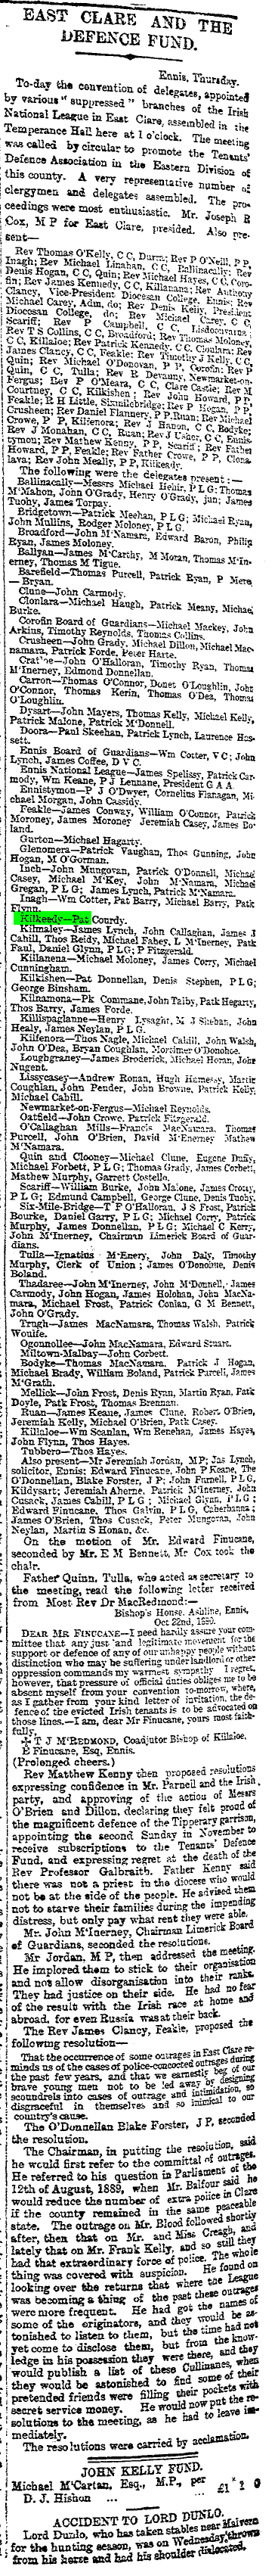 East Clare Irish National League meeting October 1890.png